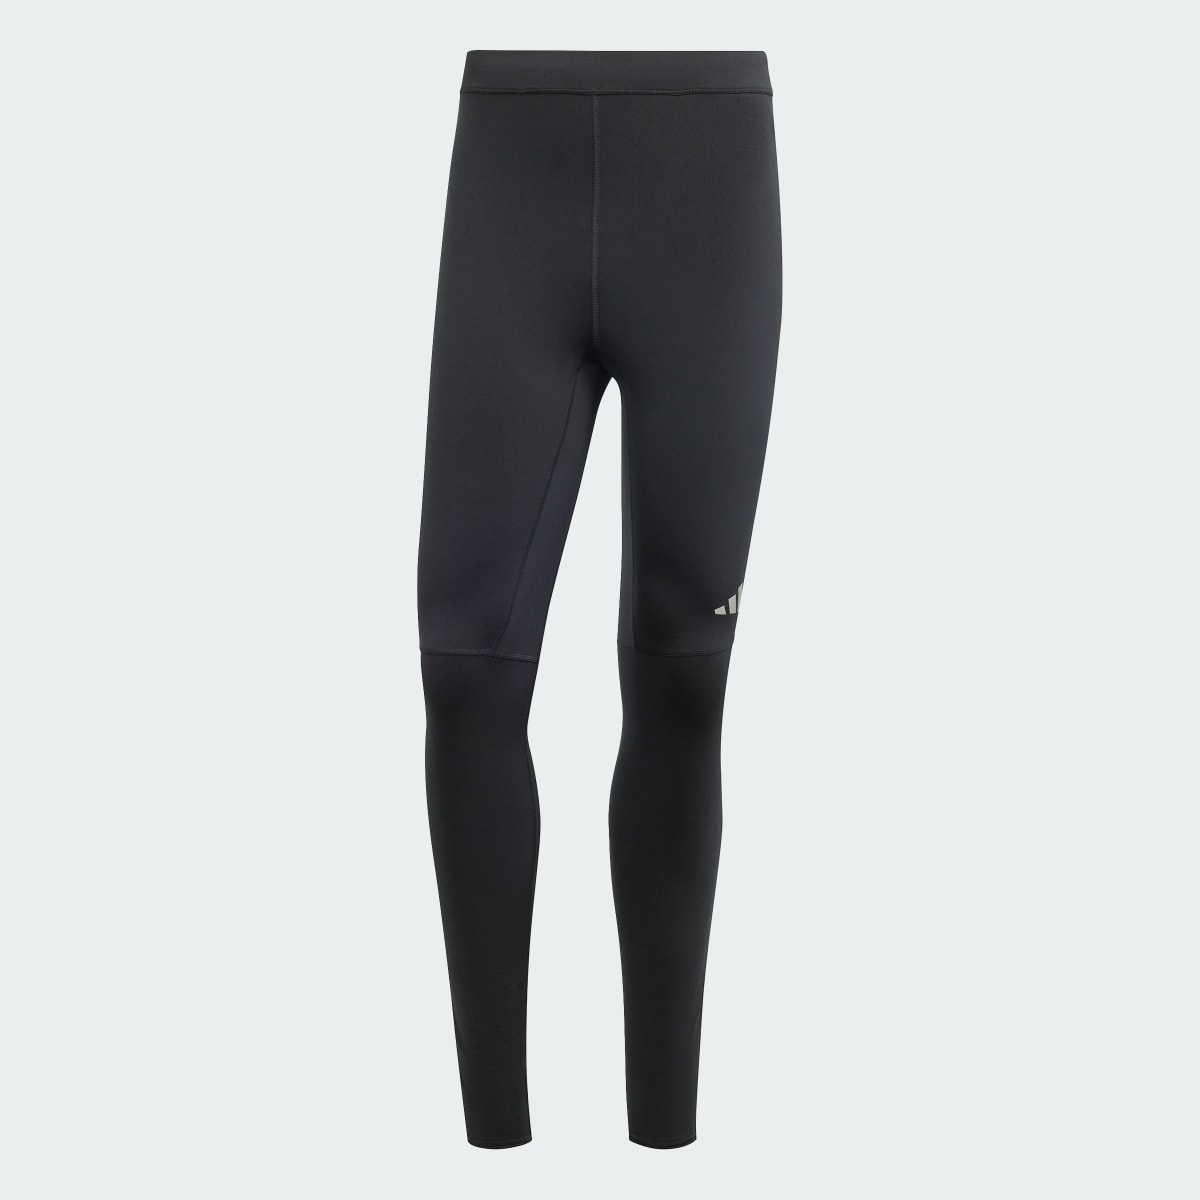 Adidas Ultimate Running Conquer the Elements AEROREADY Warming Leggings. 4